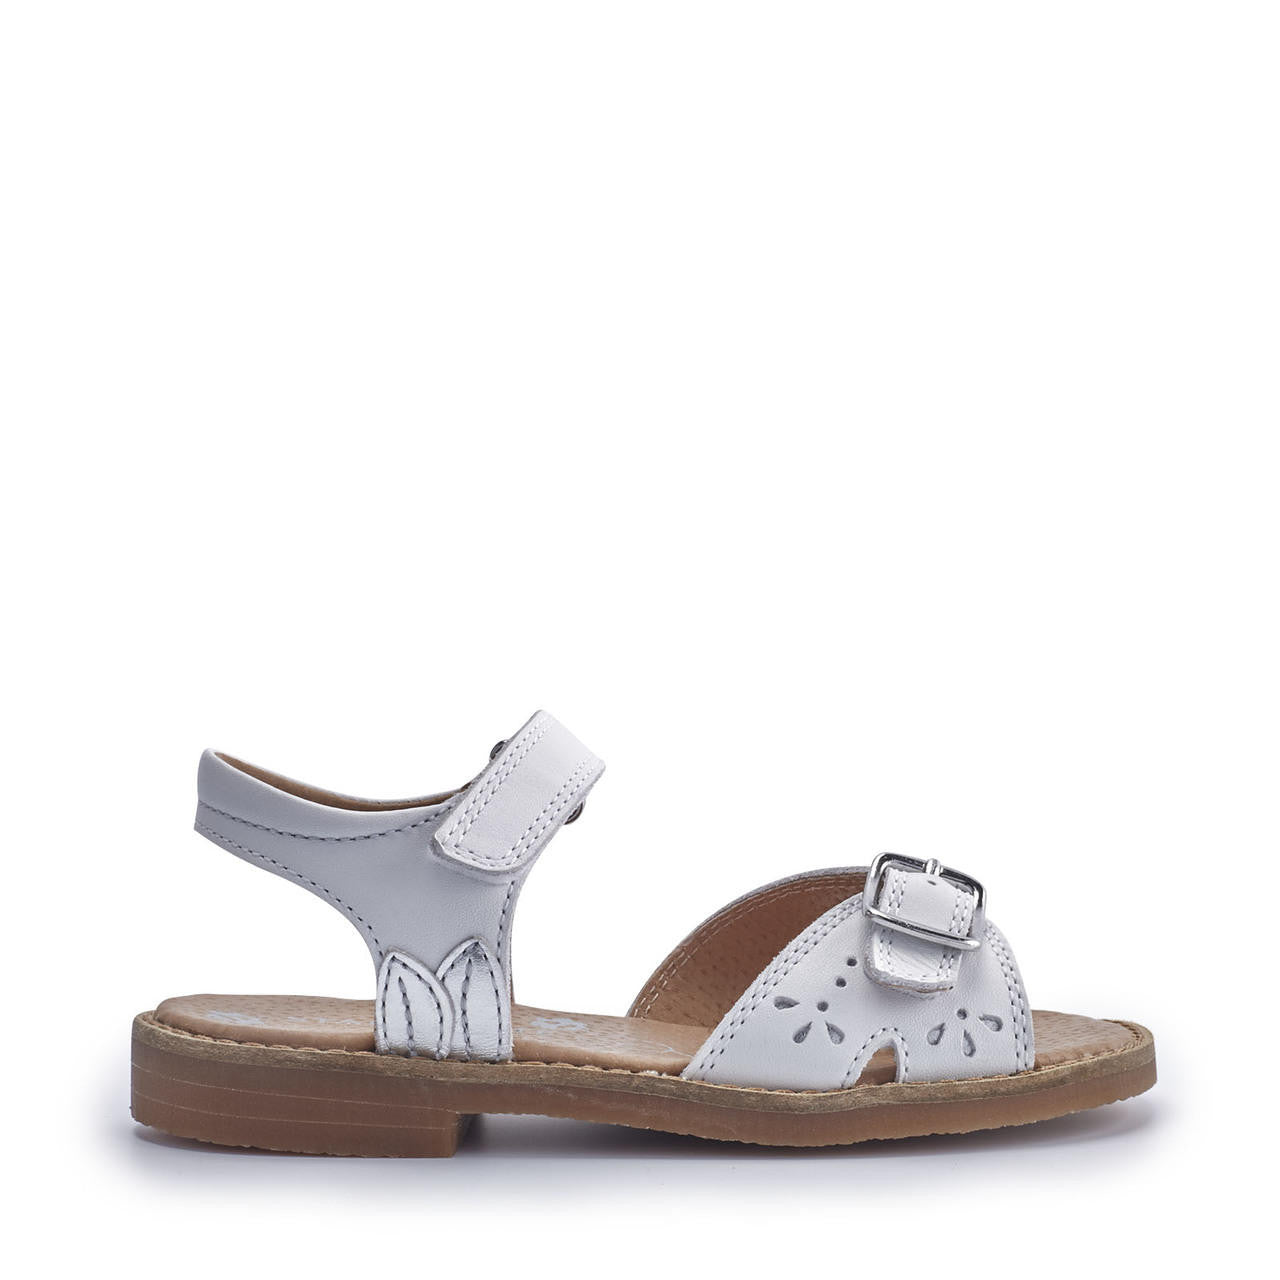 A girls open toe sandal by Start Rite, style Holiday in white leather with Velcro fastening. Right side view.